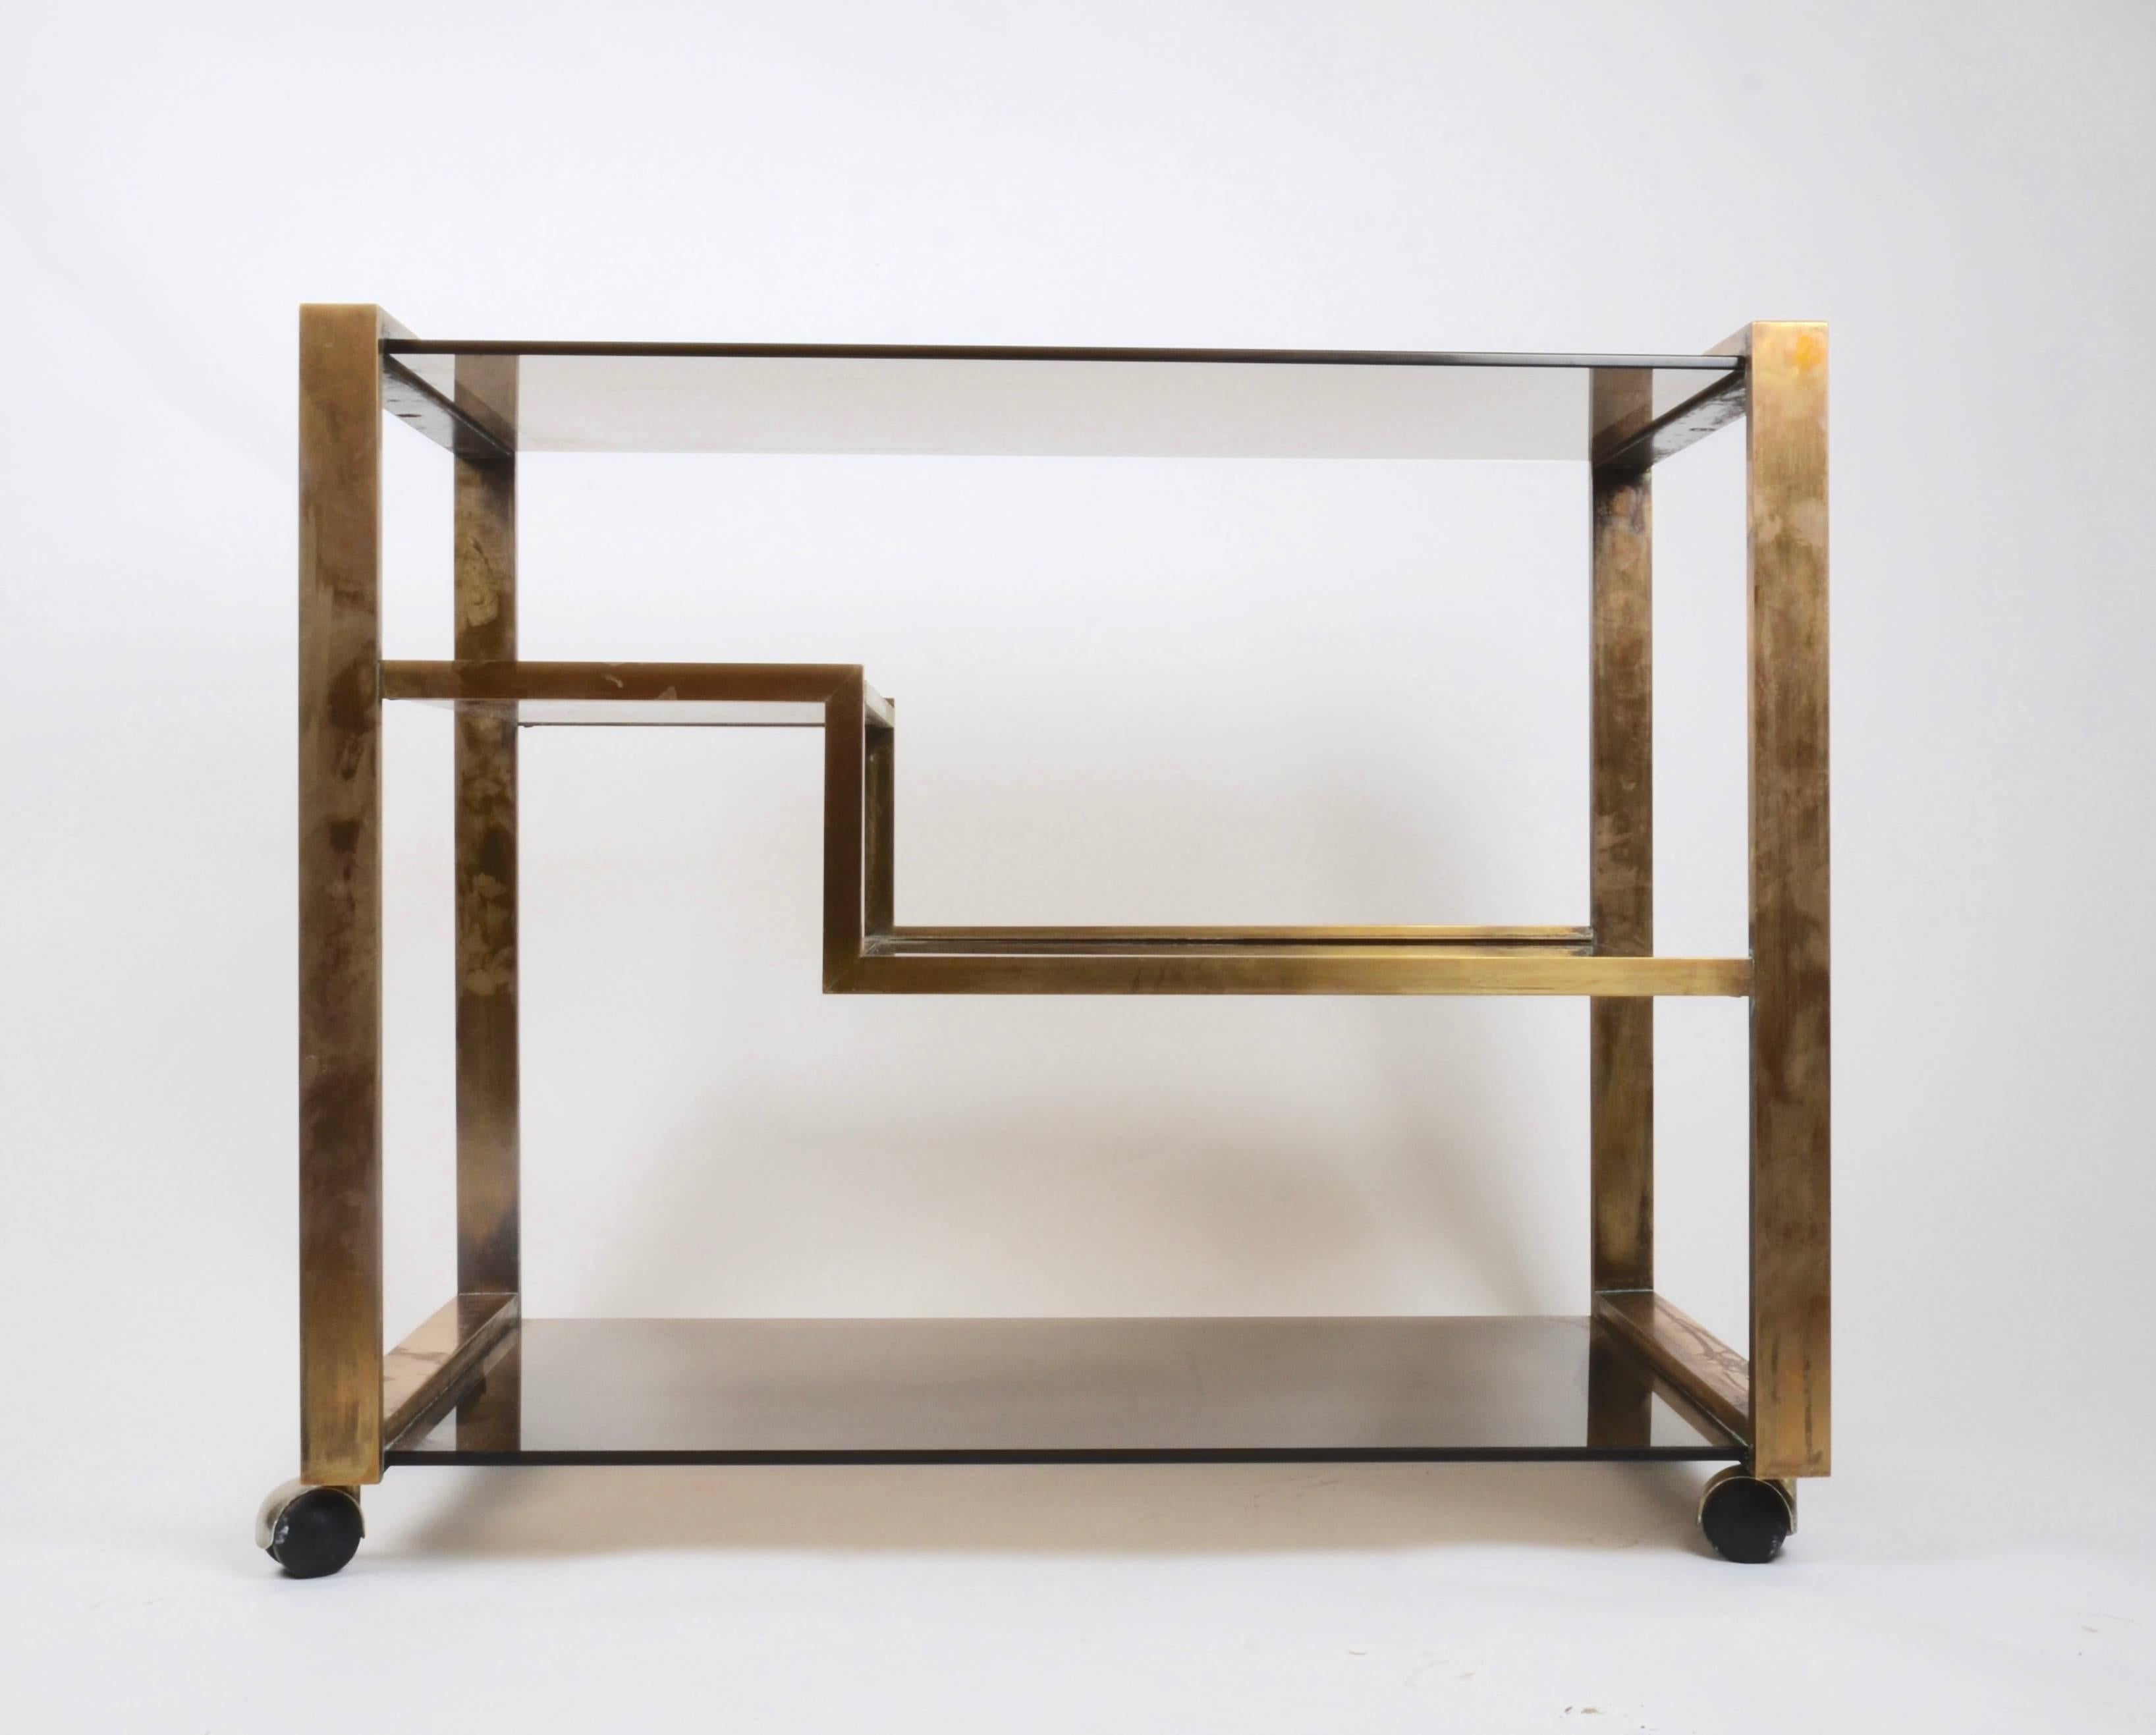 Italian bar cart in smoked glass and brass, Italy, 1970s.